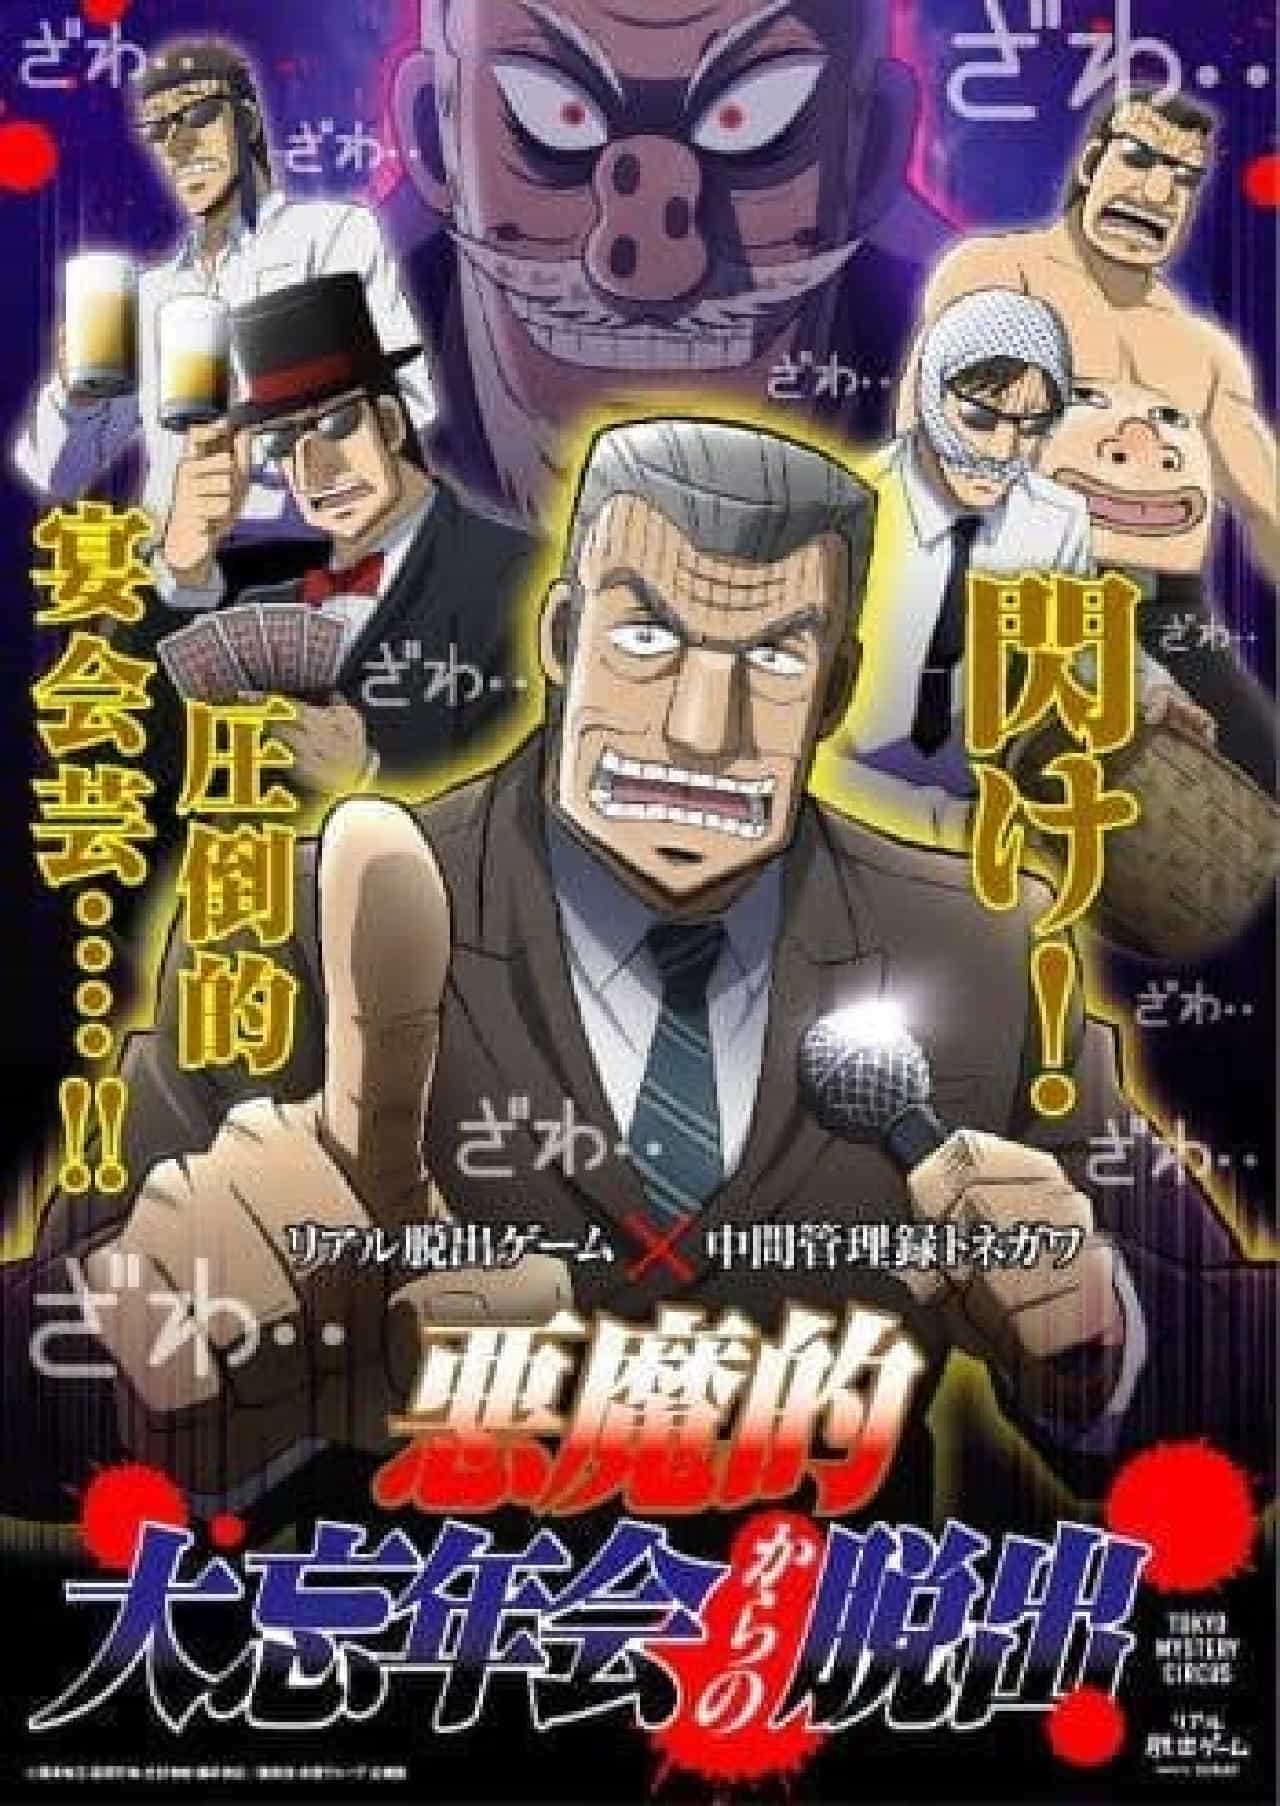 Collaboration with Tokyo Mystery Circus "Intermediate Management Record Tonegawa"